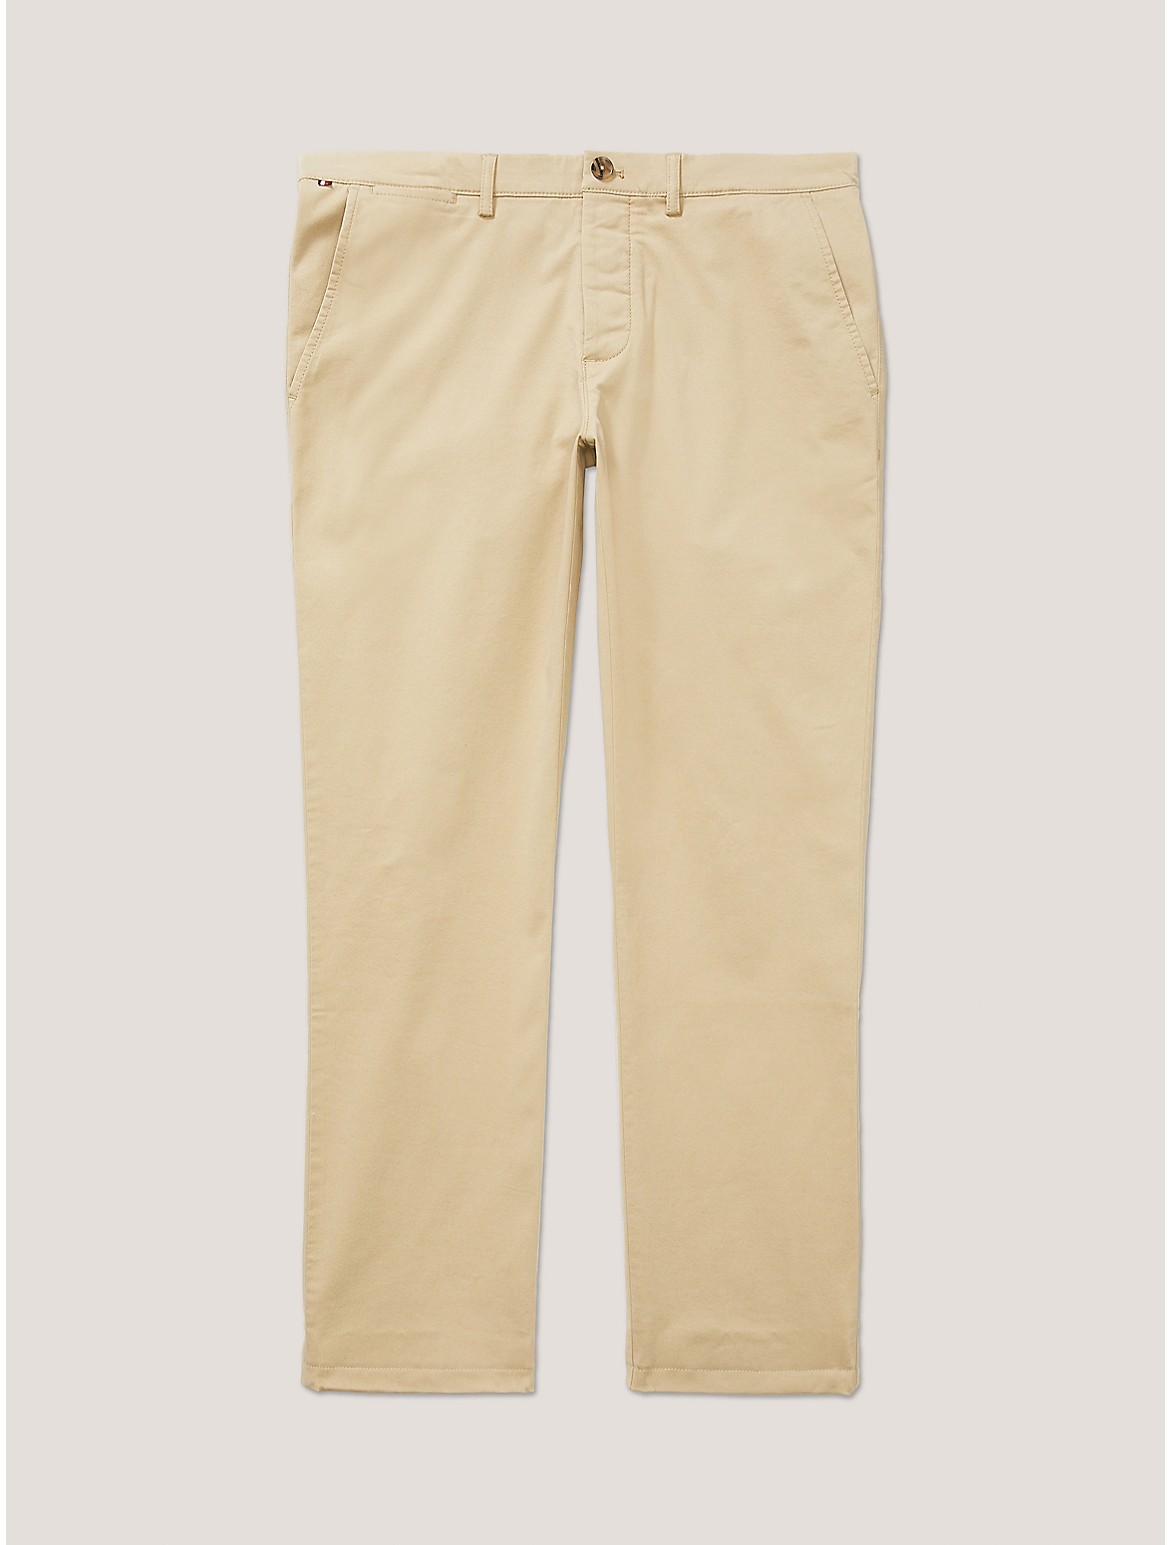 Tommy Hilfiger Men's Straight Fit Stretch Chino